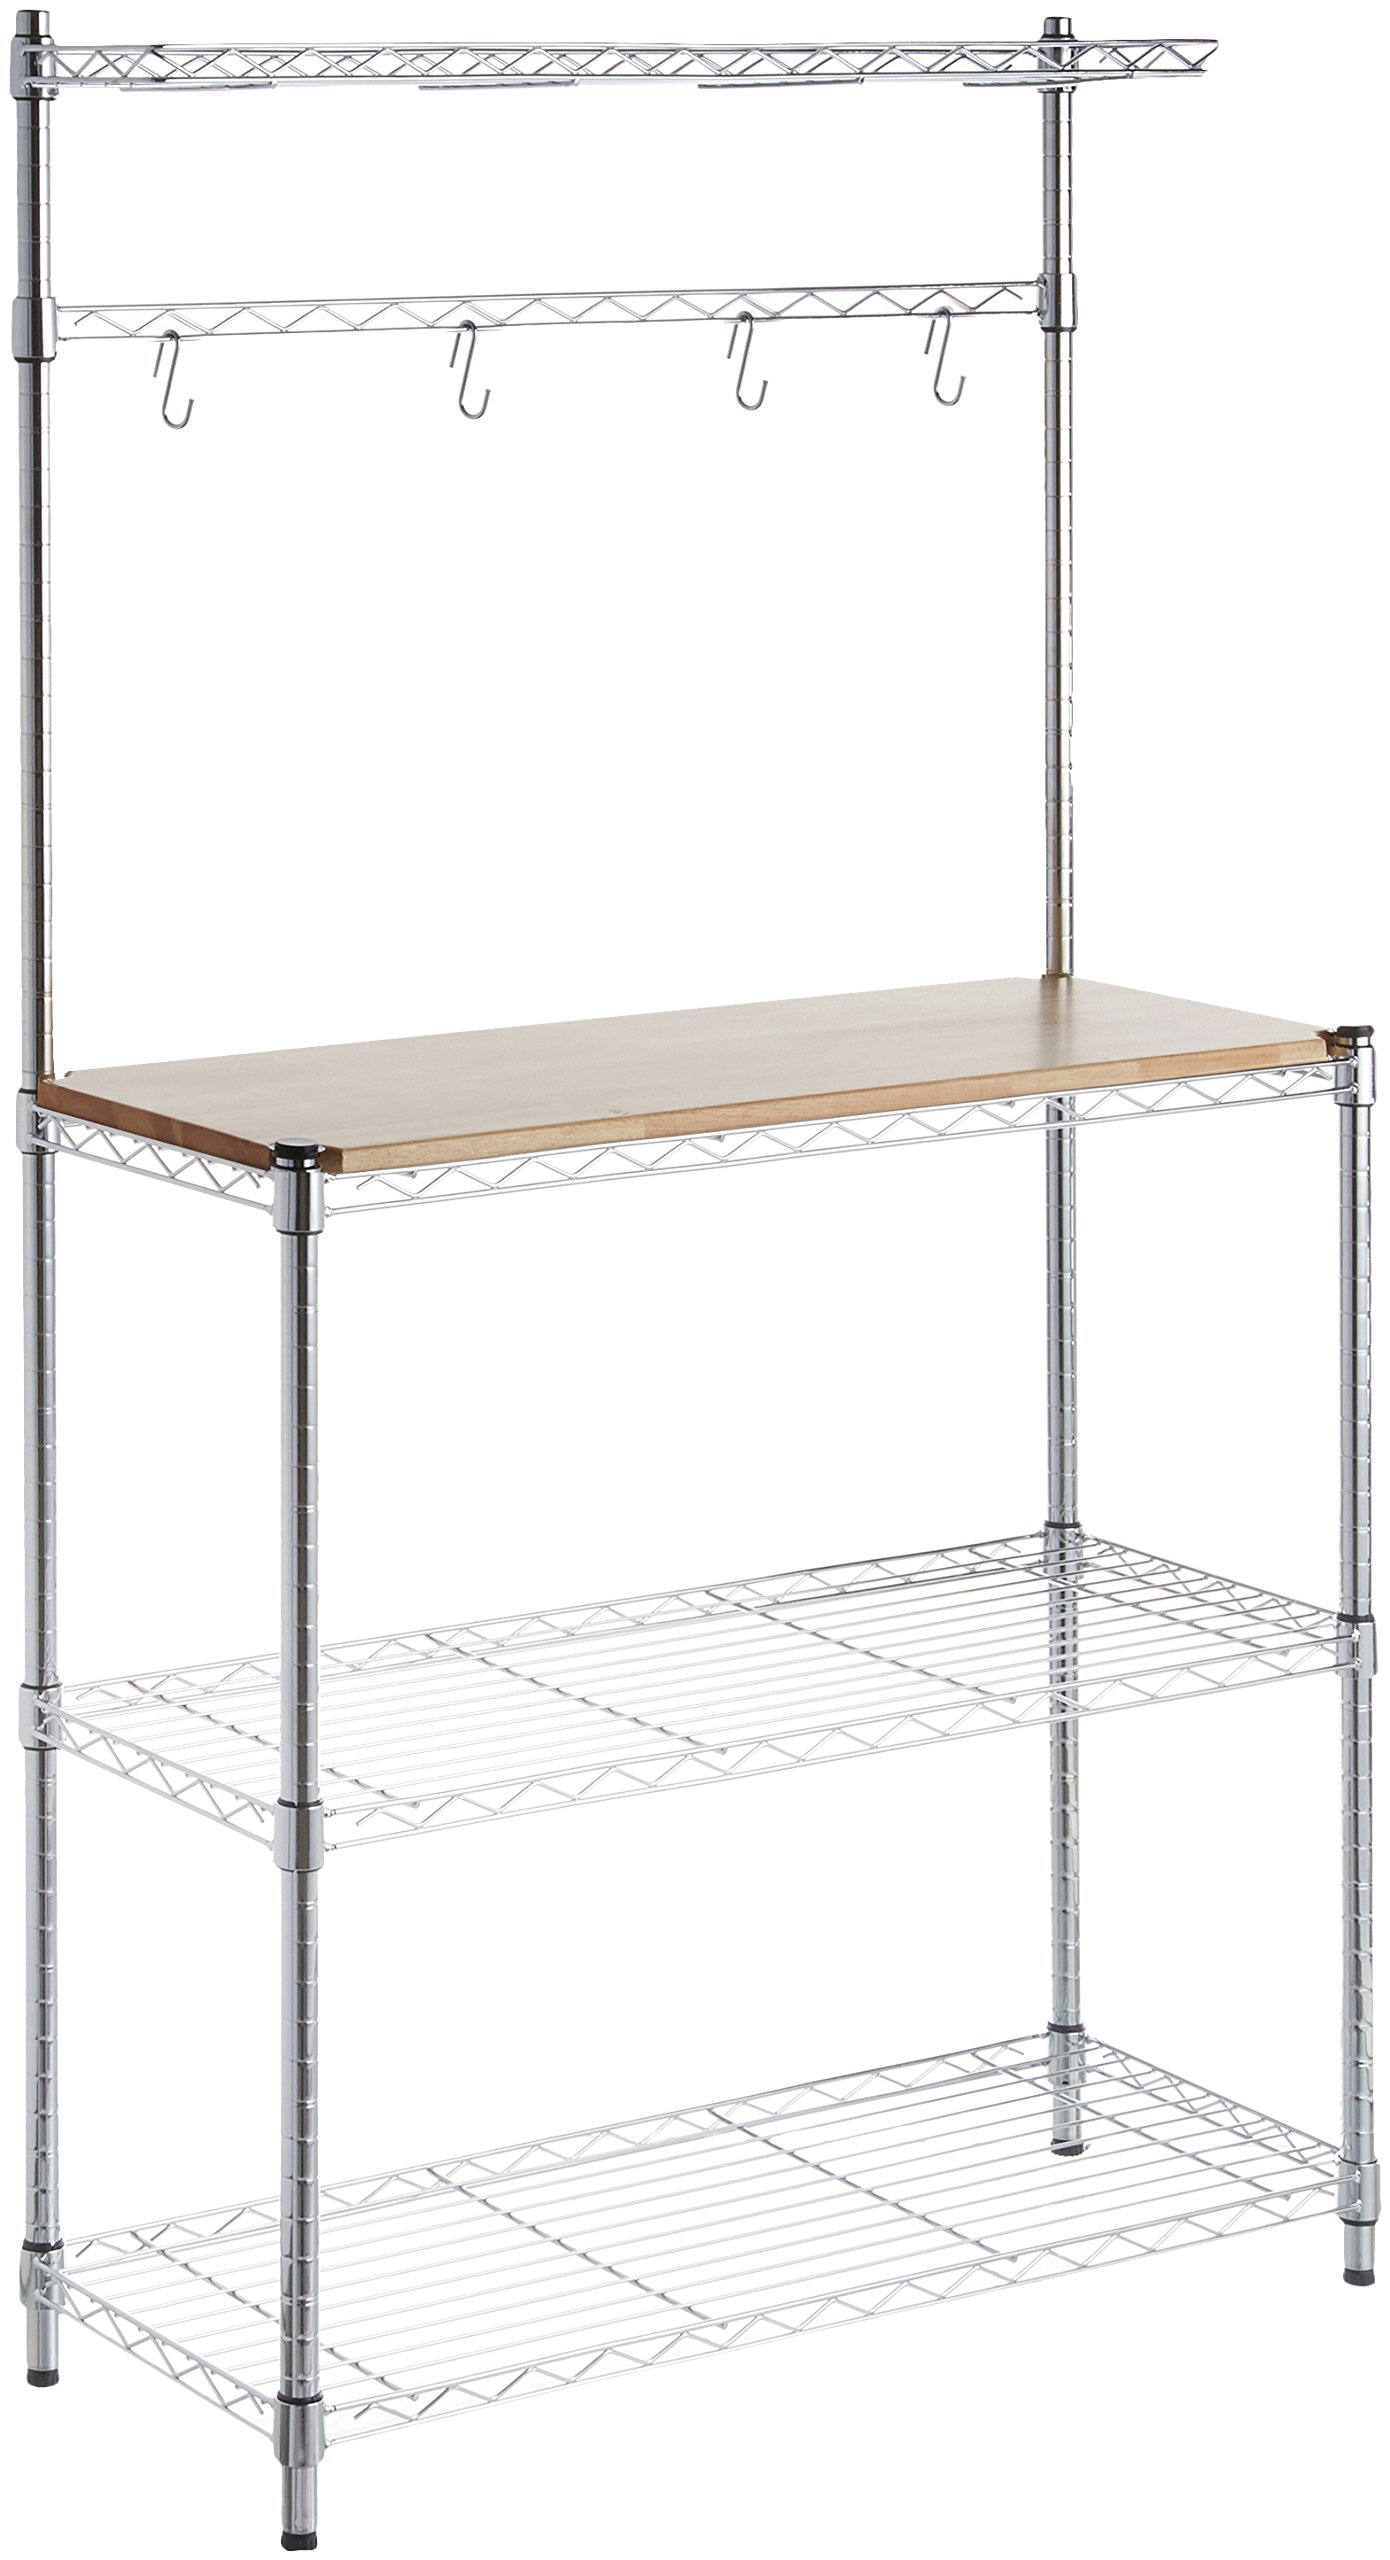 Amazon Basics 3 Tier Kitchen Storage Baker's Rack With Removeable Top, Wood/Chrome, 14